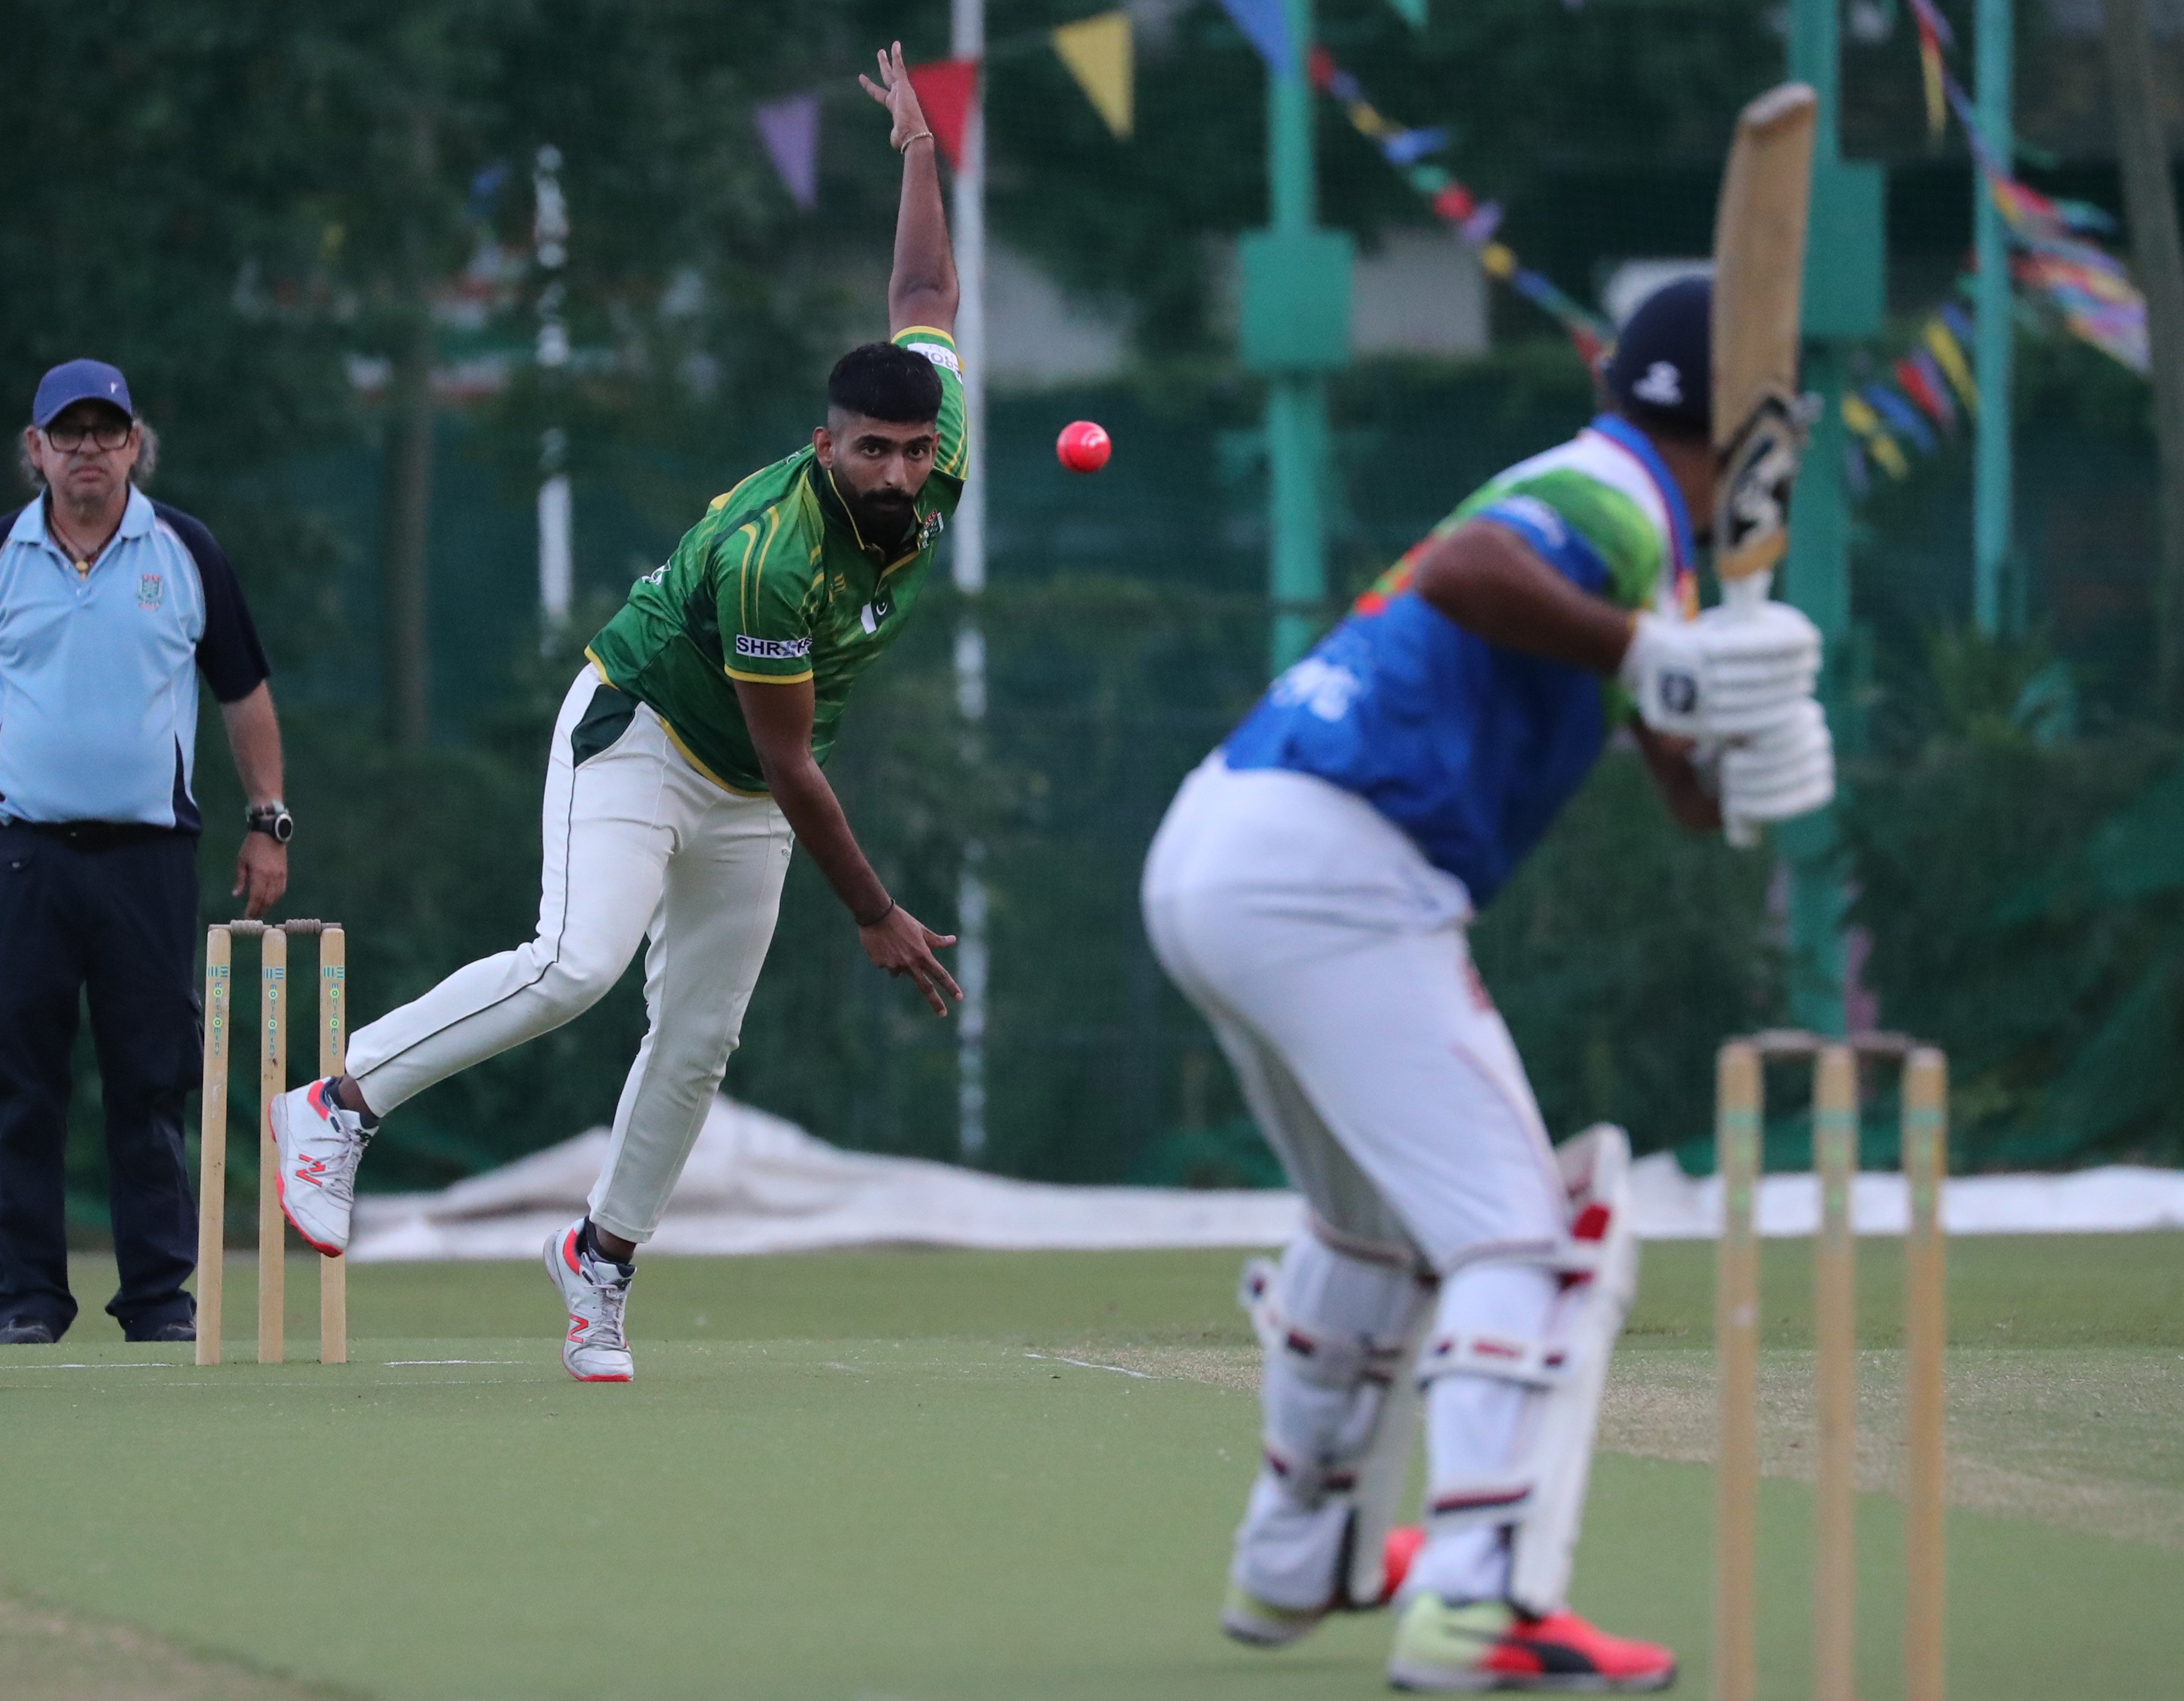 Pakistan’s Mohammad Kamran (centre) in action in a match against India at a cricket tournament in Hong Kong in 2020. Photo: Edmond So